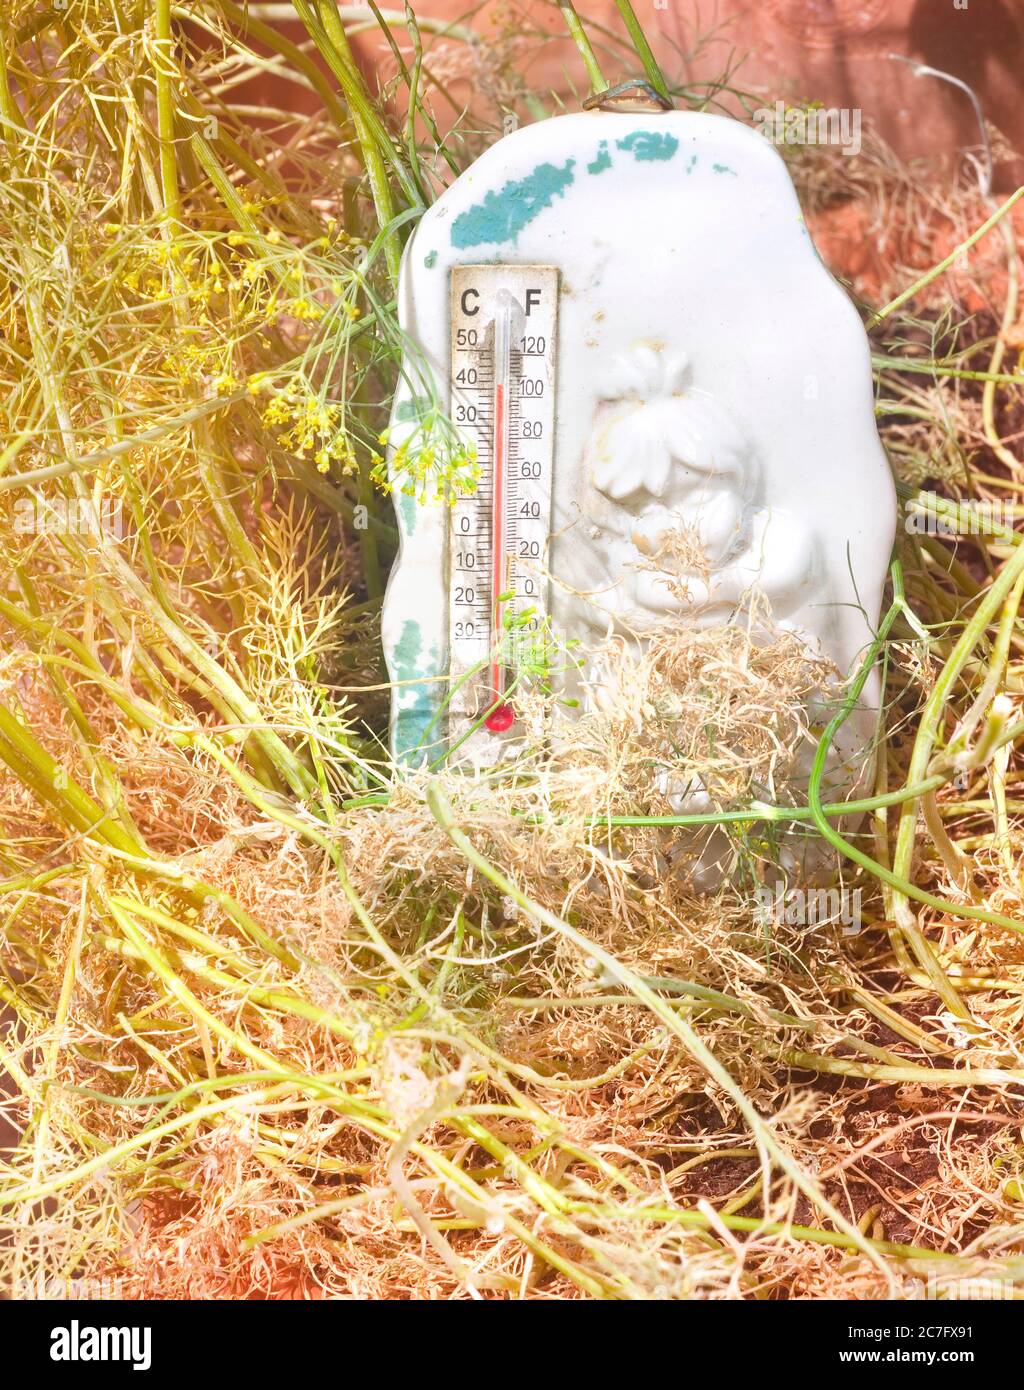 heat wave in the summer with thermometer showing high temperature and sere plants Stock Photo